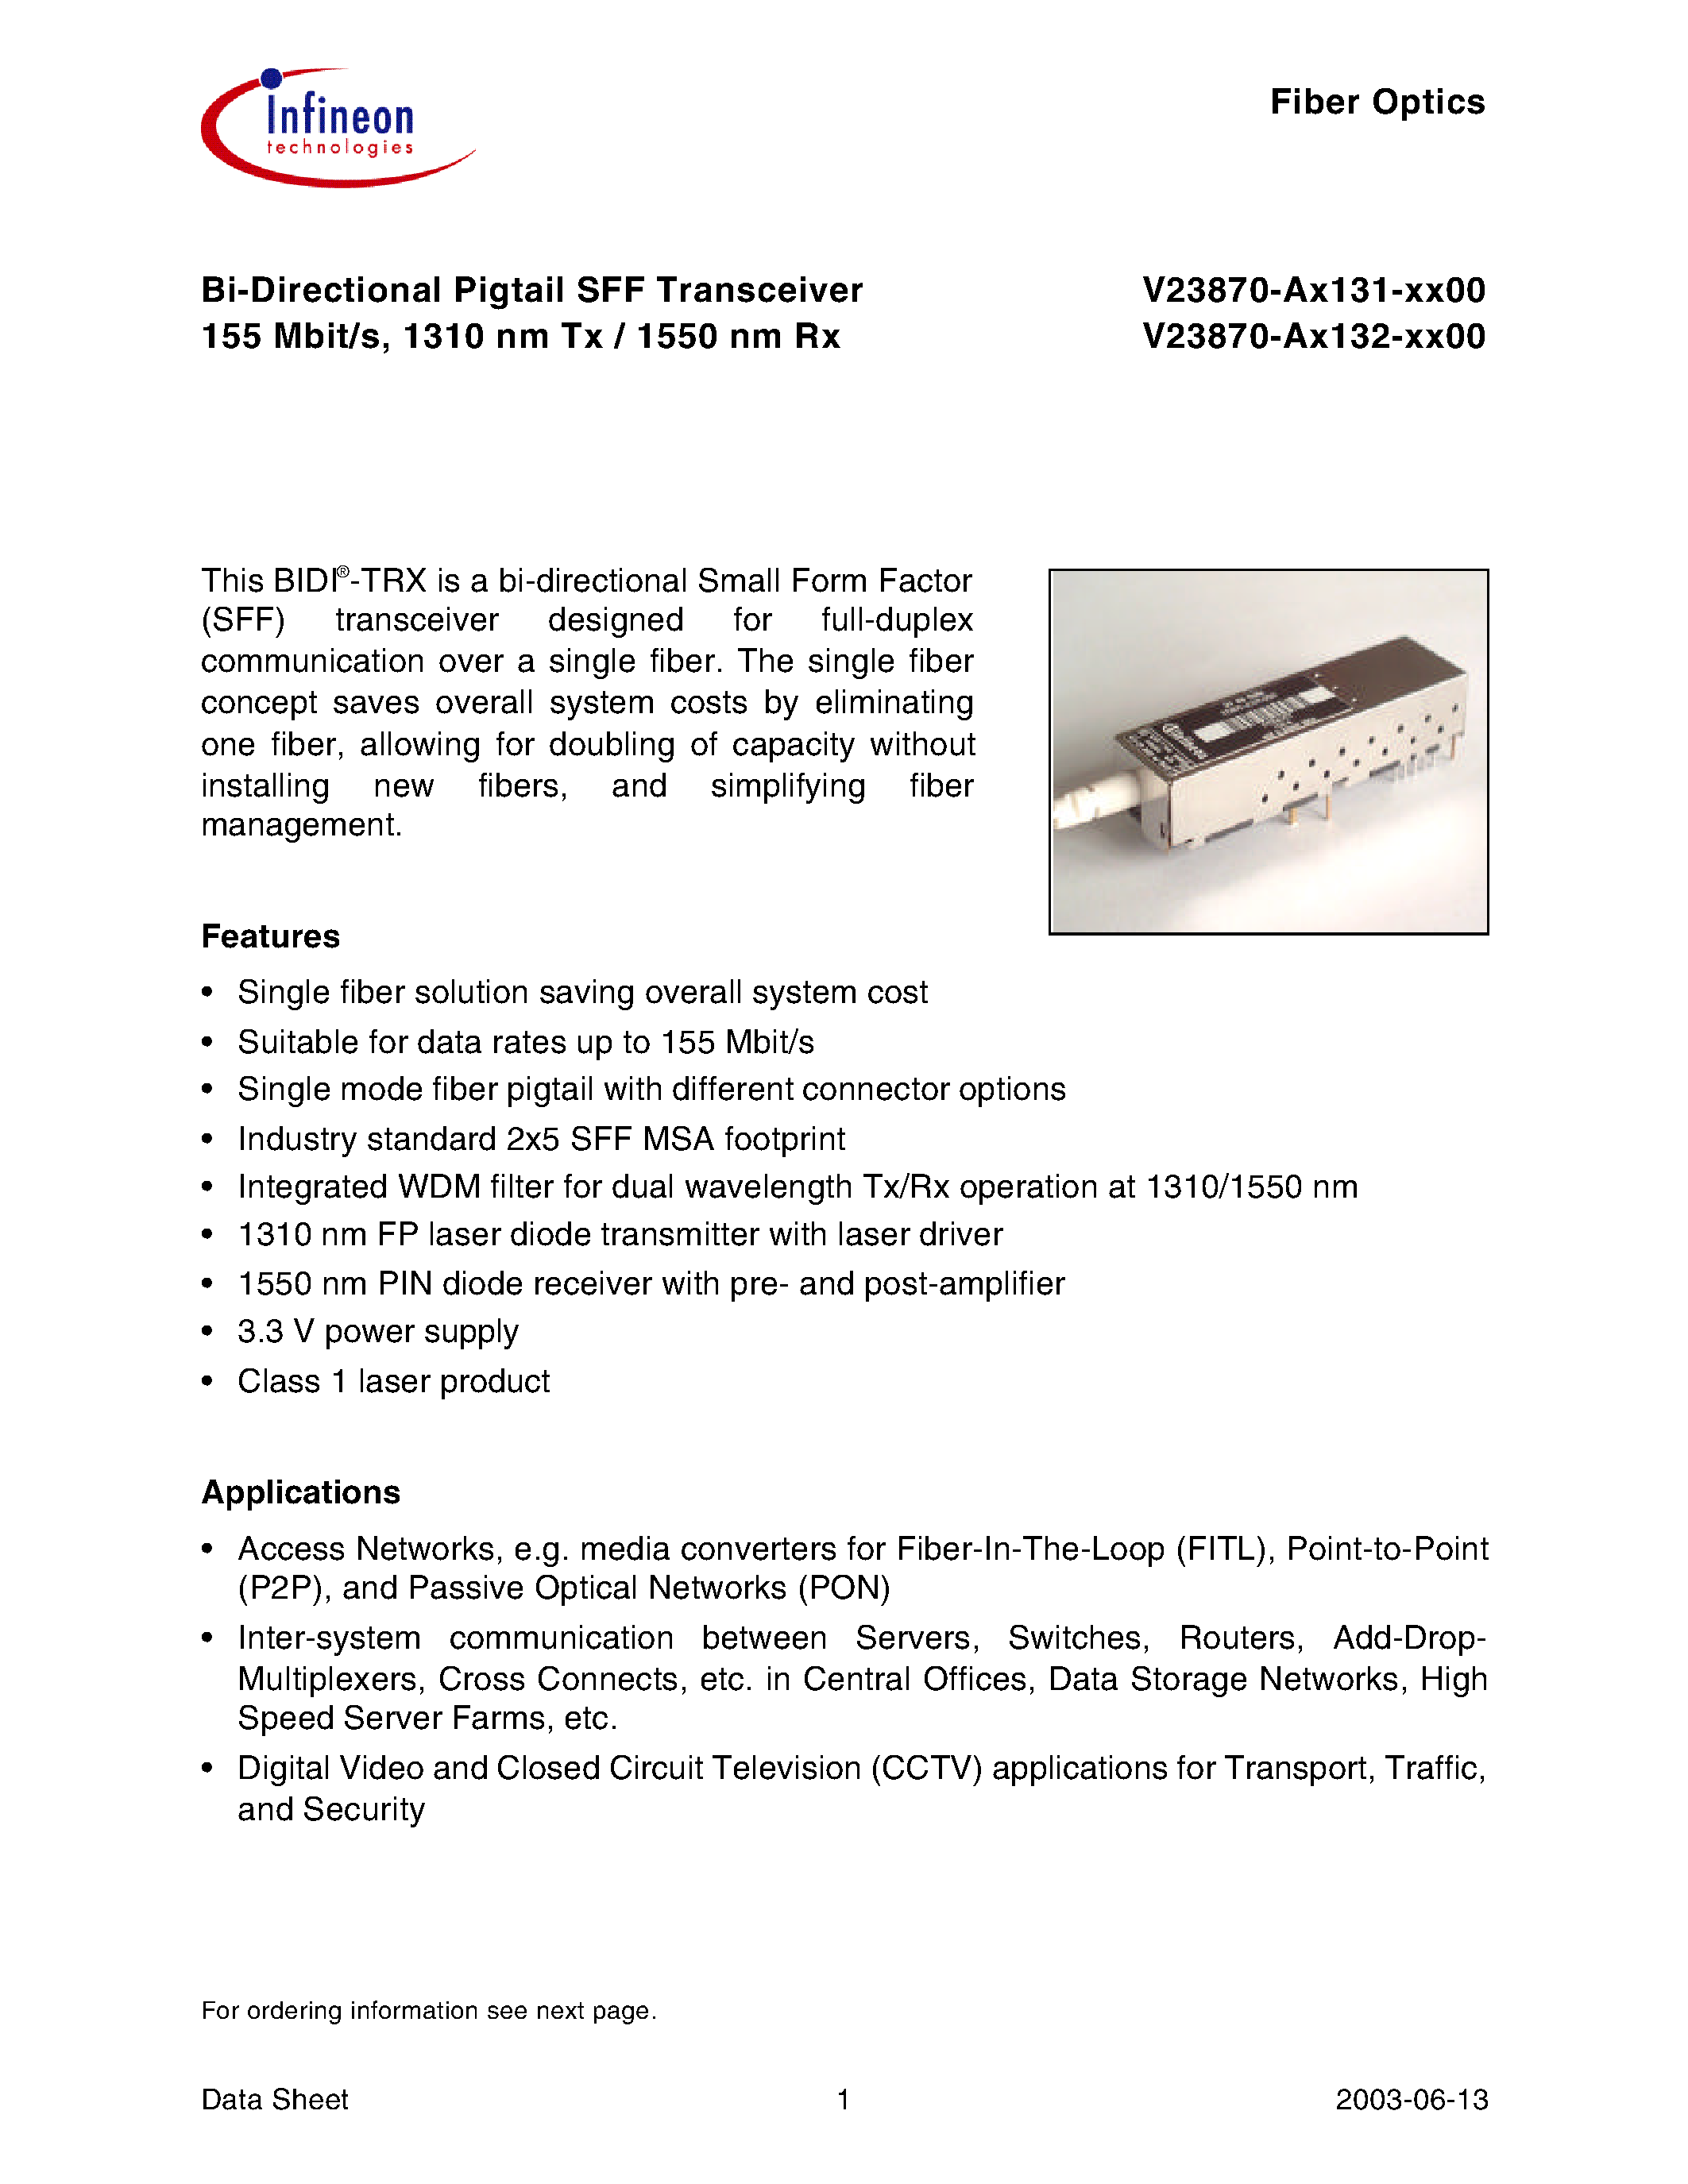 Datasheet V23870-A3132-B100 - Bi-Directional Pigtail SFF Transceiver 155 Mbit/s/ 1310 nm Tx / 1550 nm Rx page 1